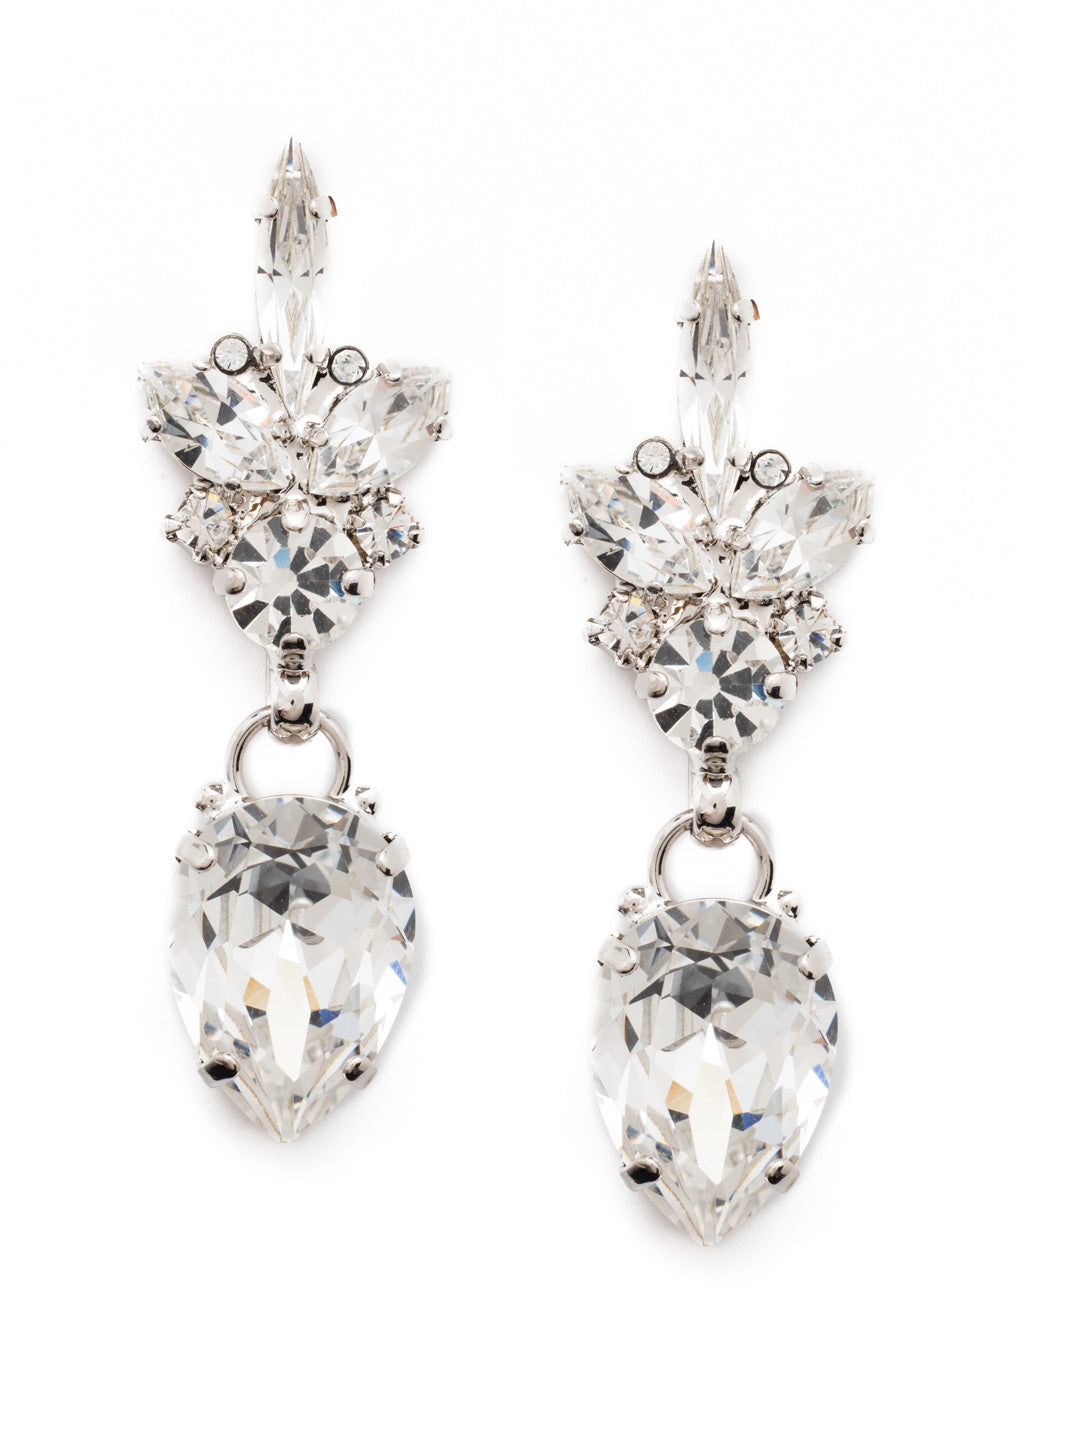 Crystal Cluster and Pear Drop Dangle Earrings - ECZ30RHCRY